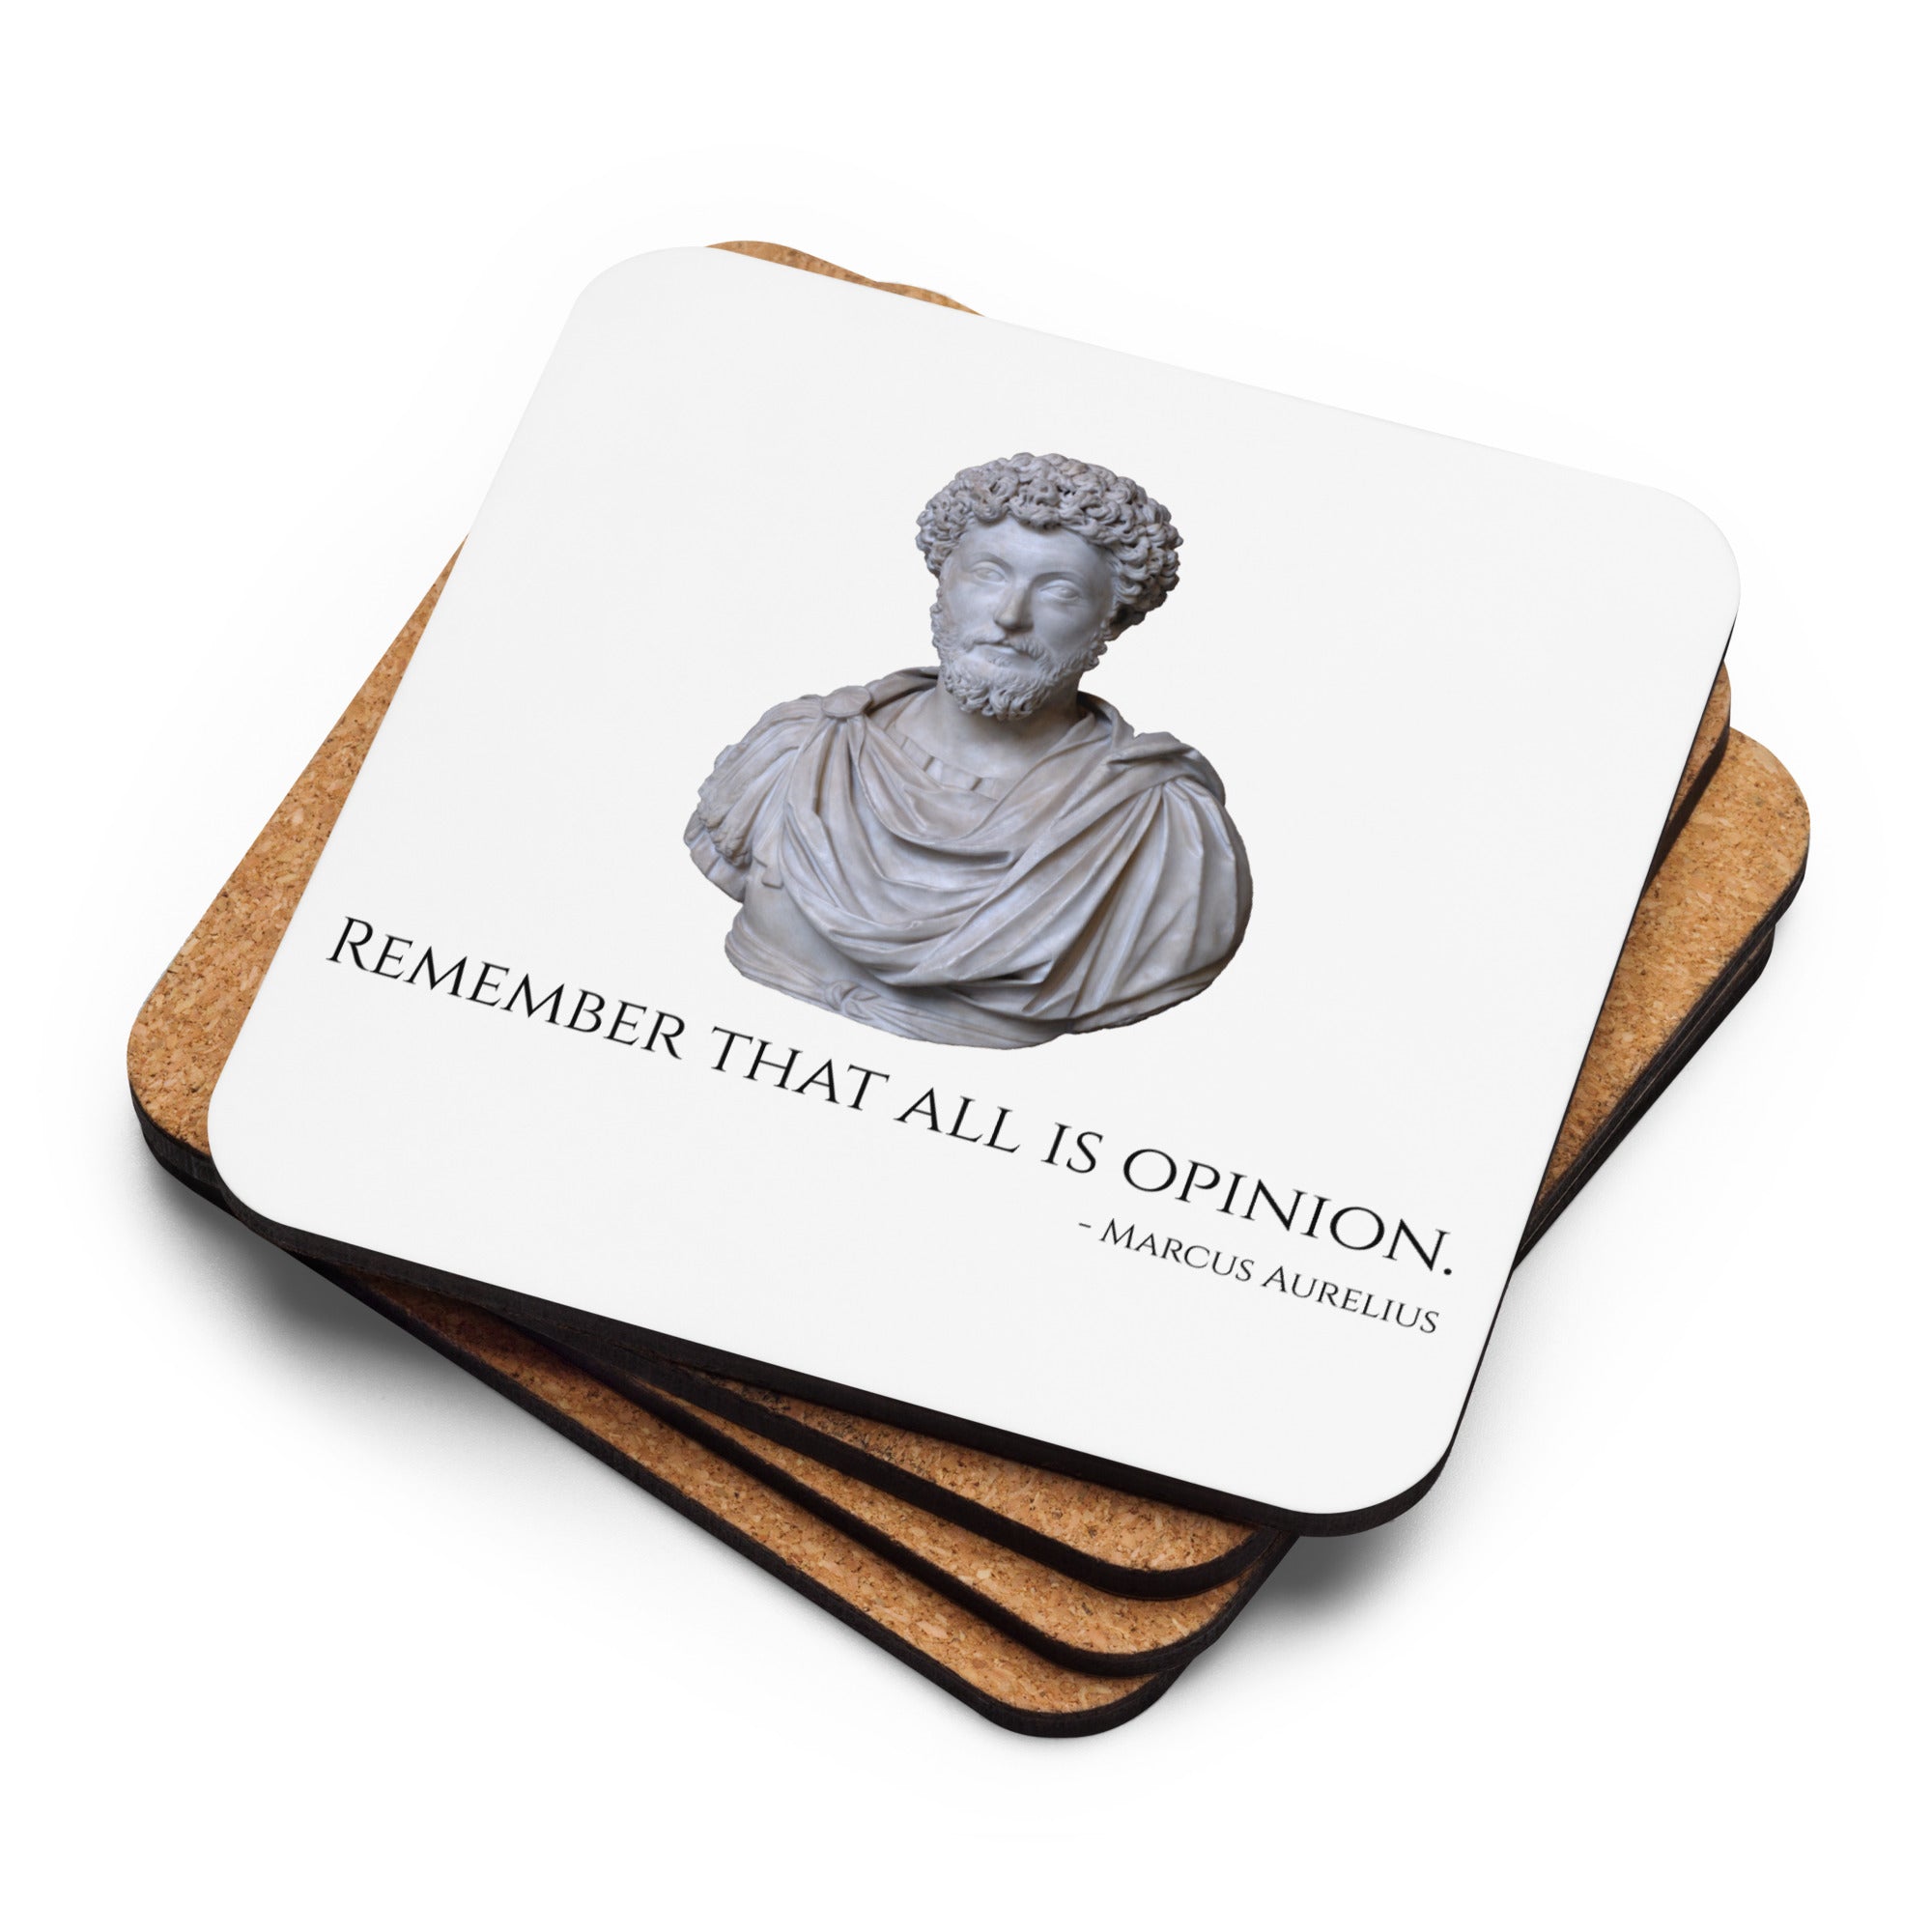 Remember That All Is Opinion - Marcus Aurelius - Stoic Philosophy Cork-Back Coaster